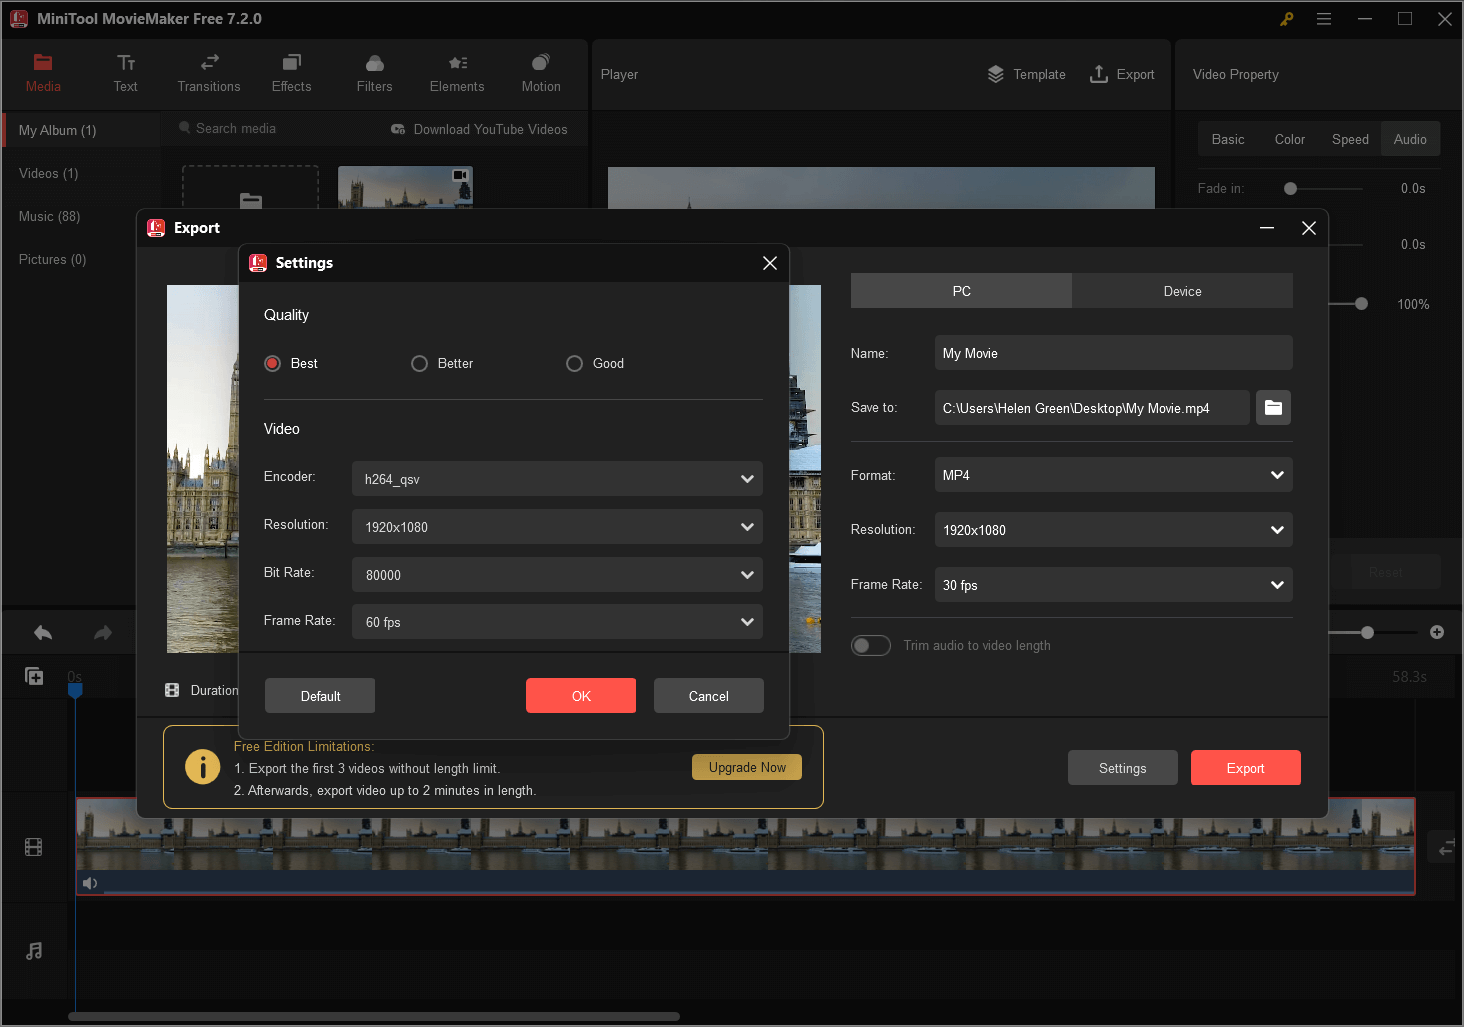 export a video as MP4 from MiniTool MovieMaker